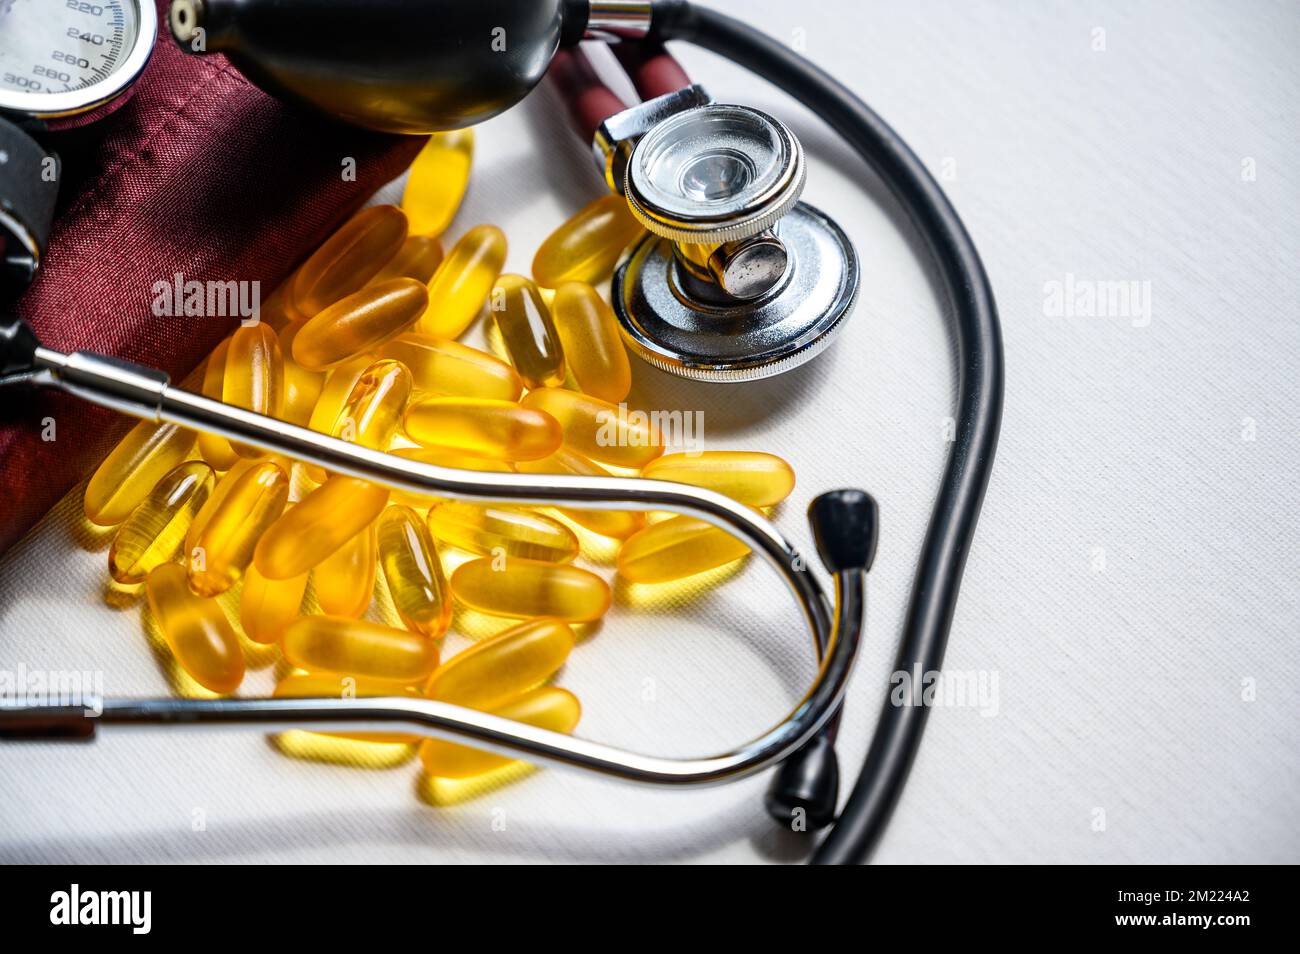 Omega 3 fish oil supplements with stethoscope and blood pressure cuff Stock  Photo - Alamy